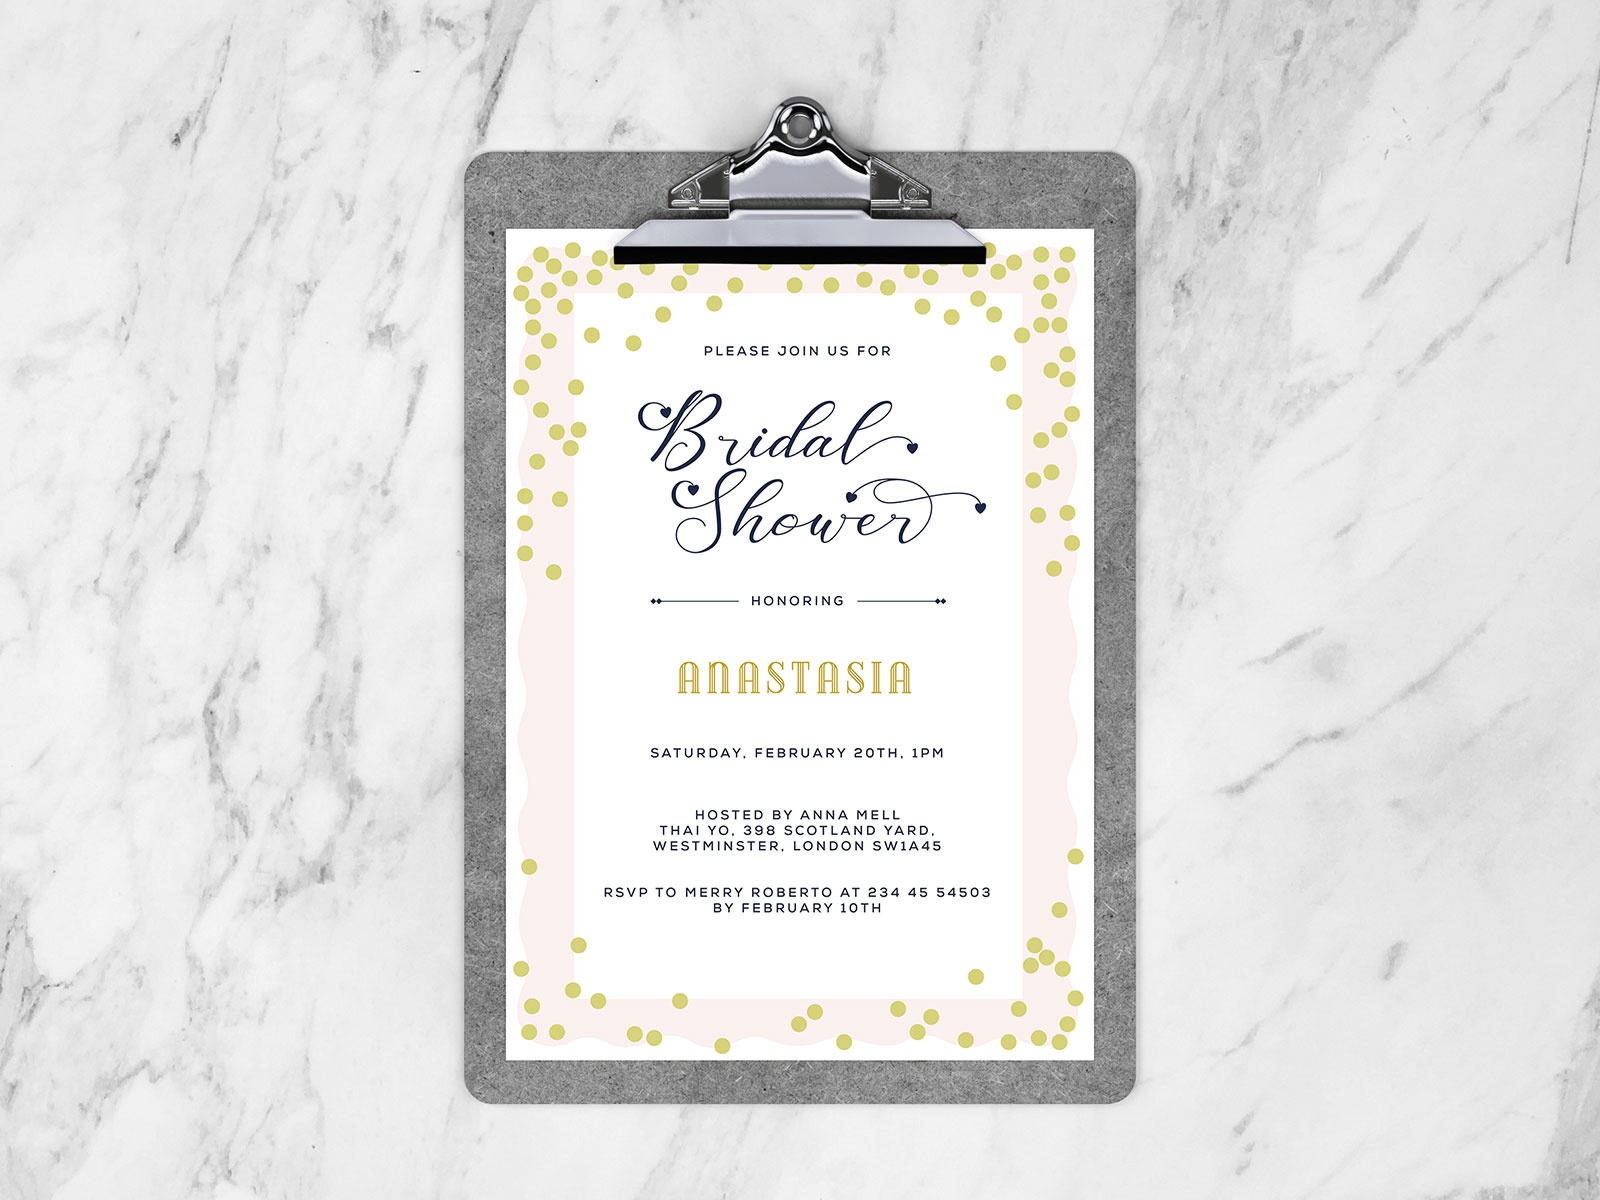 Free Bridal Shower Flyer Design Template by Zee Que  Designbolts  Inside Bridal Shower Flyer Template Pertaining To Bridal Shower Flyer Template